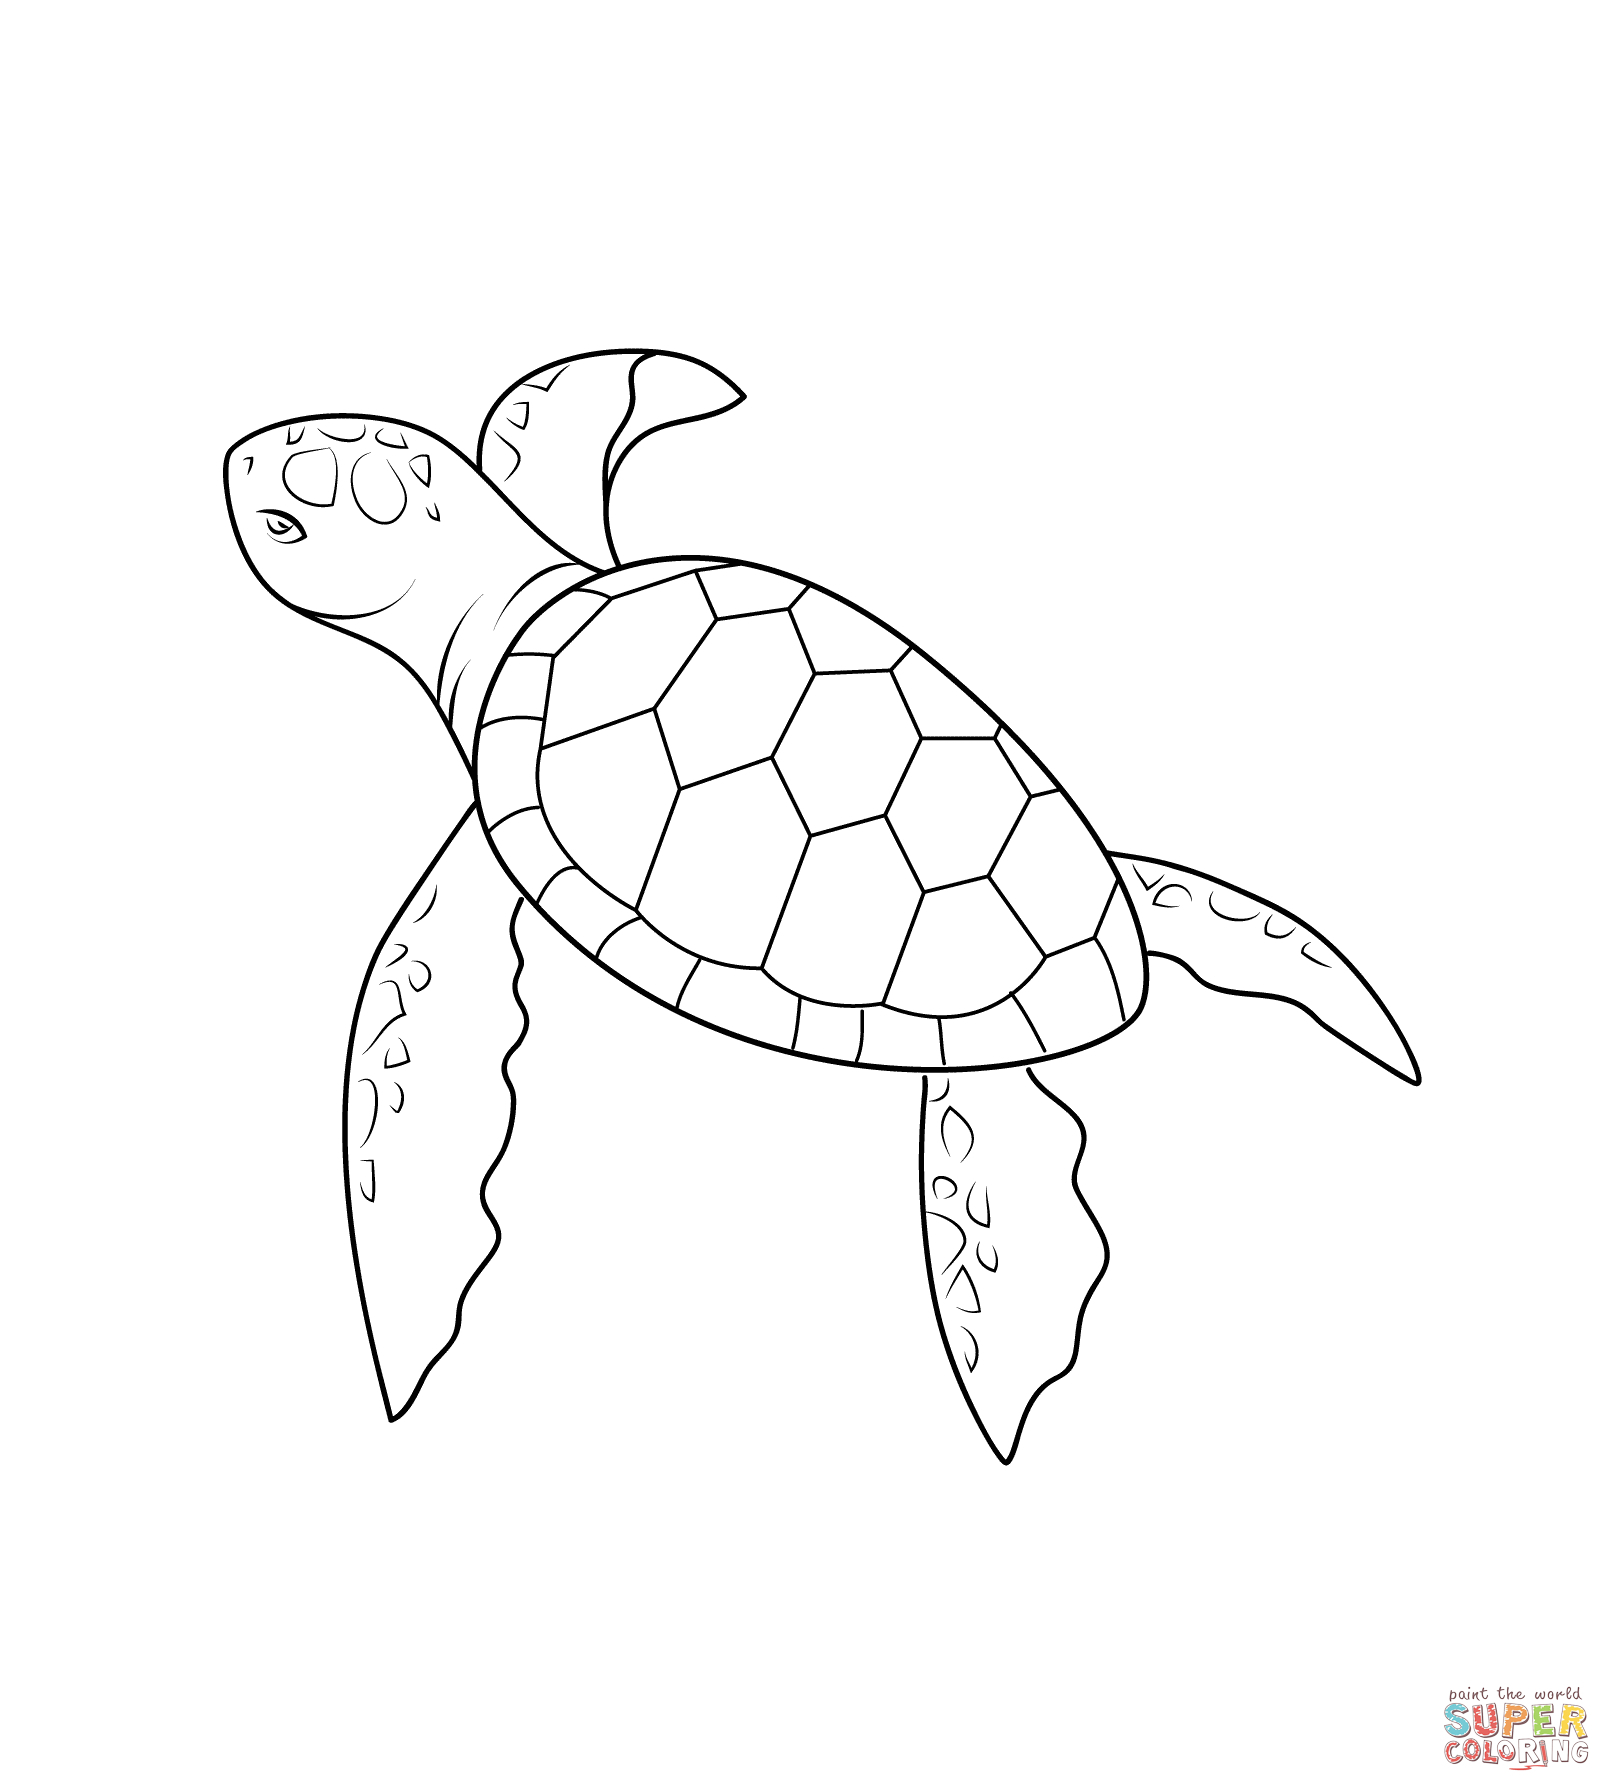 Turtle Sketch Easy at PaintingValley.com | Explore collection of Turtle